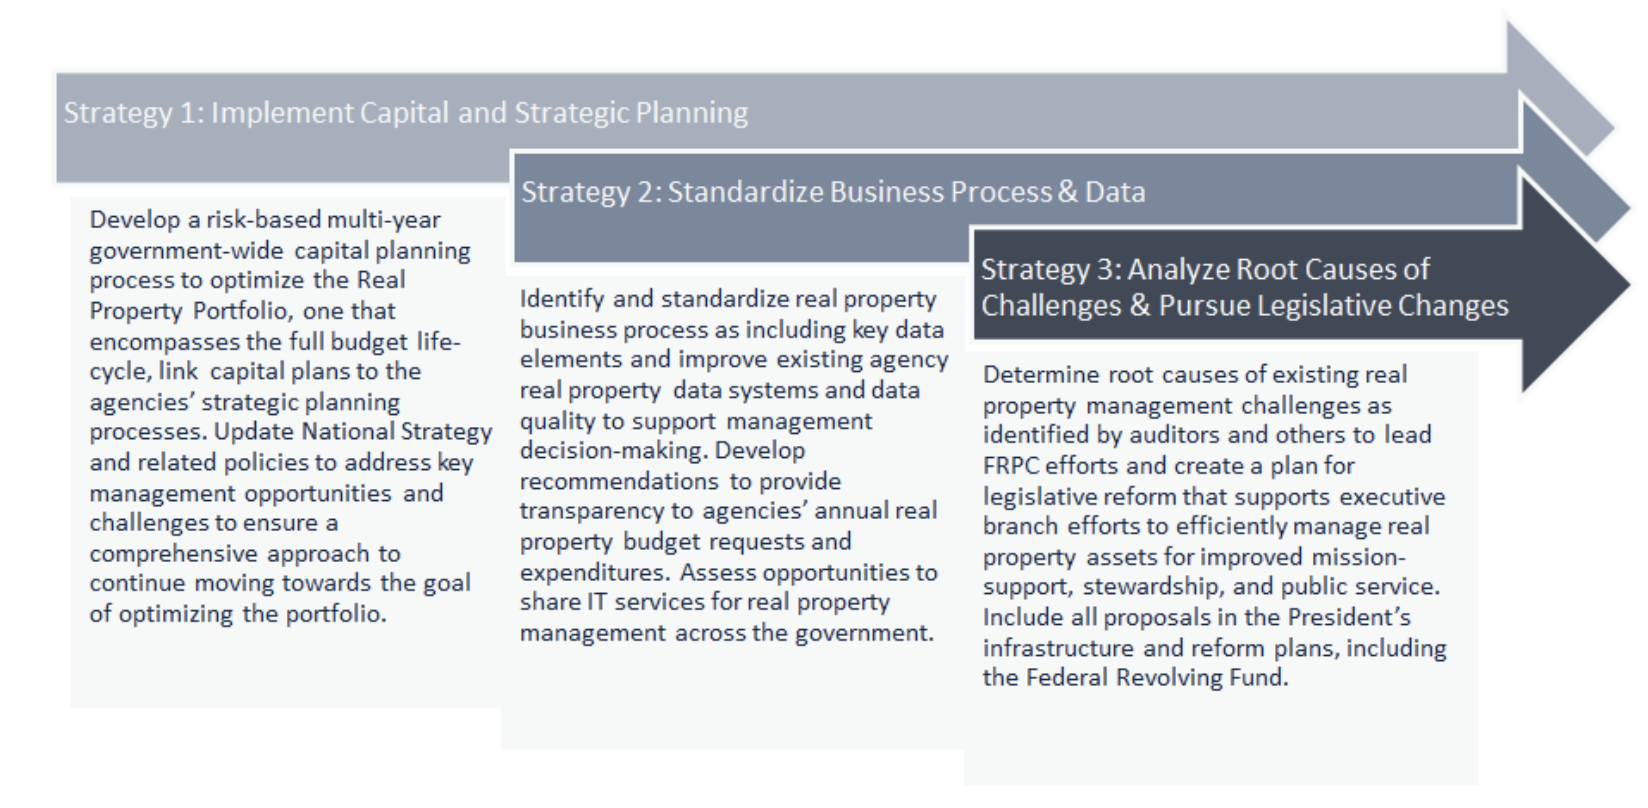 The Federal Real Property Council strategic approach features the following 3 strategies. These strategies build on one another. Strategy 1: Implement Capital and Strategic Planning: Develop a risk-based multi-year government-wide capital planning process to optimize the Real Property Portfolio, one that encompasses the full budget life-cycle, link capital plans to the agencies’ strategic planning processes. Update National Strategy and related policies to address key management opportunities and challenges to ensure a comprehensive approach to continue moving towards the goal of optimizing the portfolio. Strategy 3: Analyze Root Causes of Challenges & Pursue Legislative Changes: Determine root causes of existing real property management challenges as identified by auditors and others to lead FRPC efforts and create a plan for legislative reform that supports executive branch efforts to efficiently manage real property assets for improved mission-support, stewardship, and public service. Include all proposals in the President’s infrastructure and reform plans, including the Federal Revolving Fund.